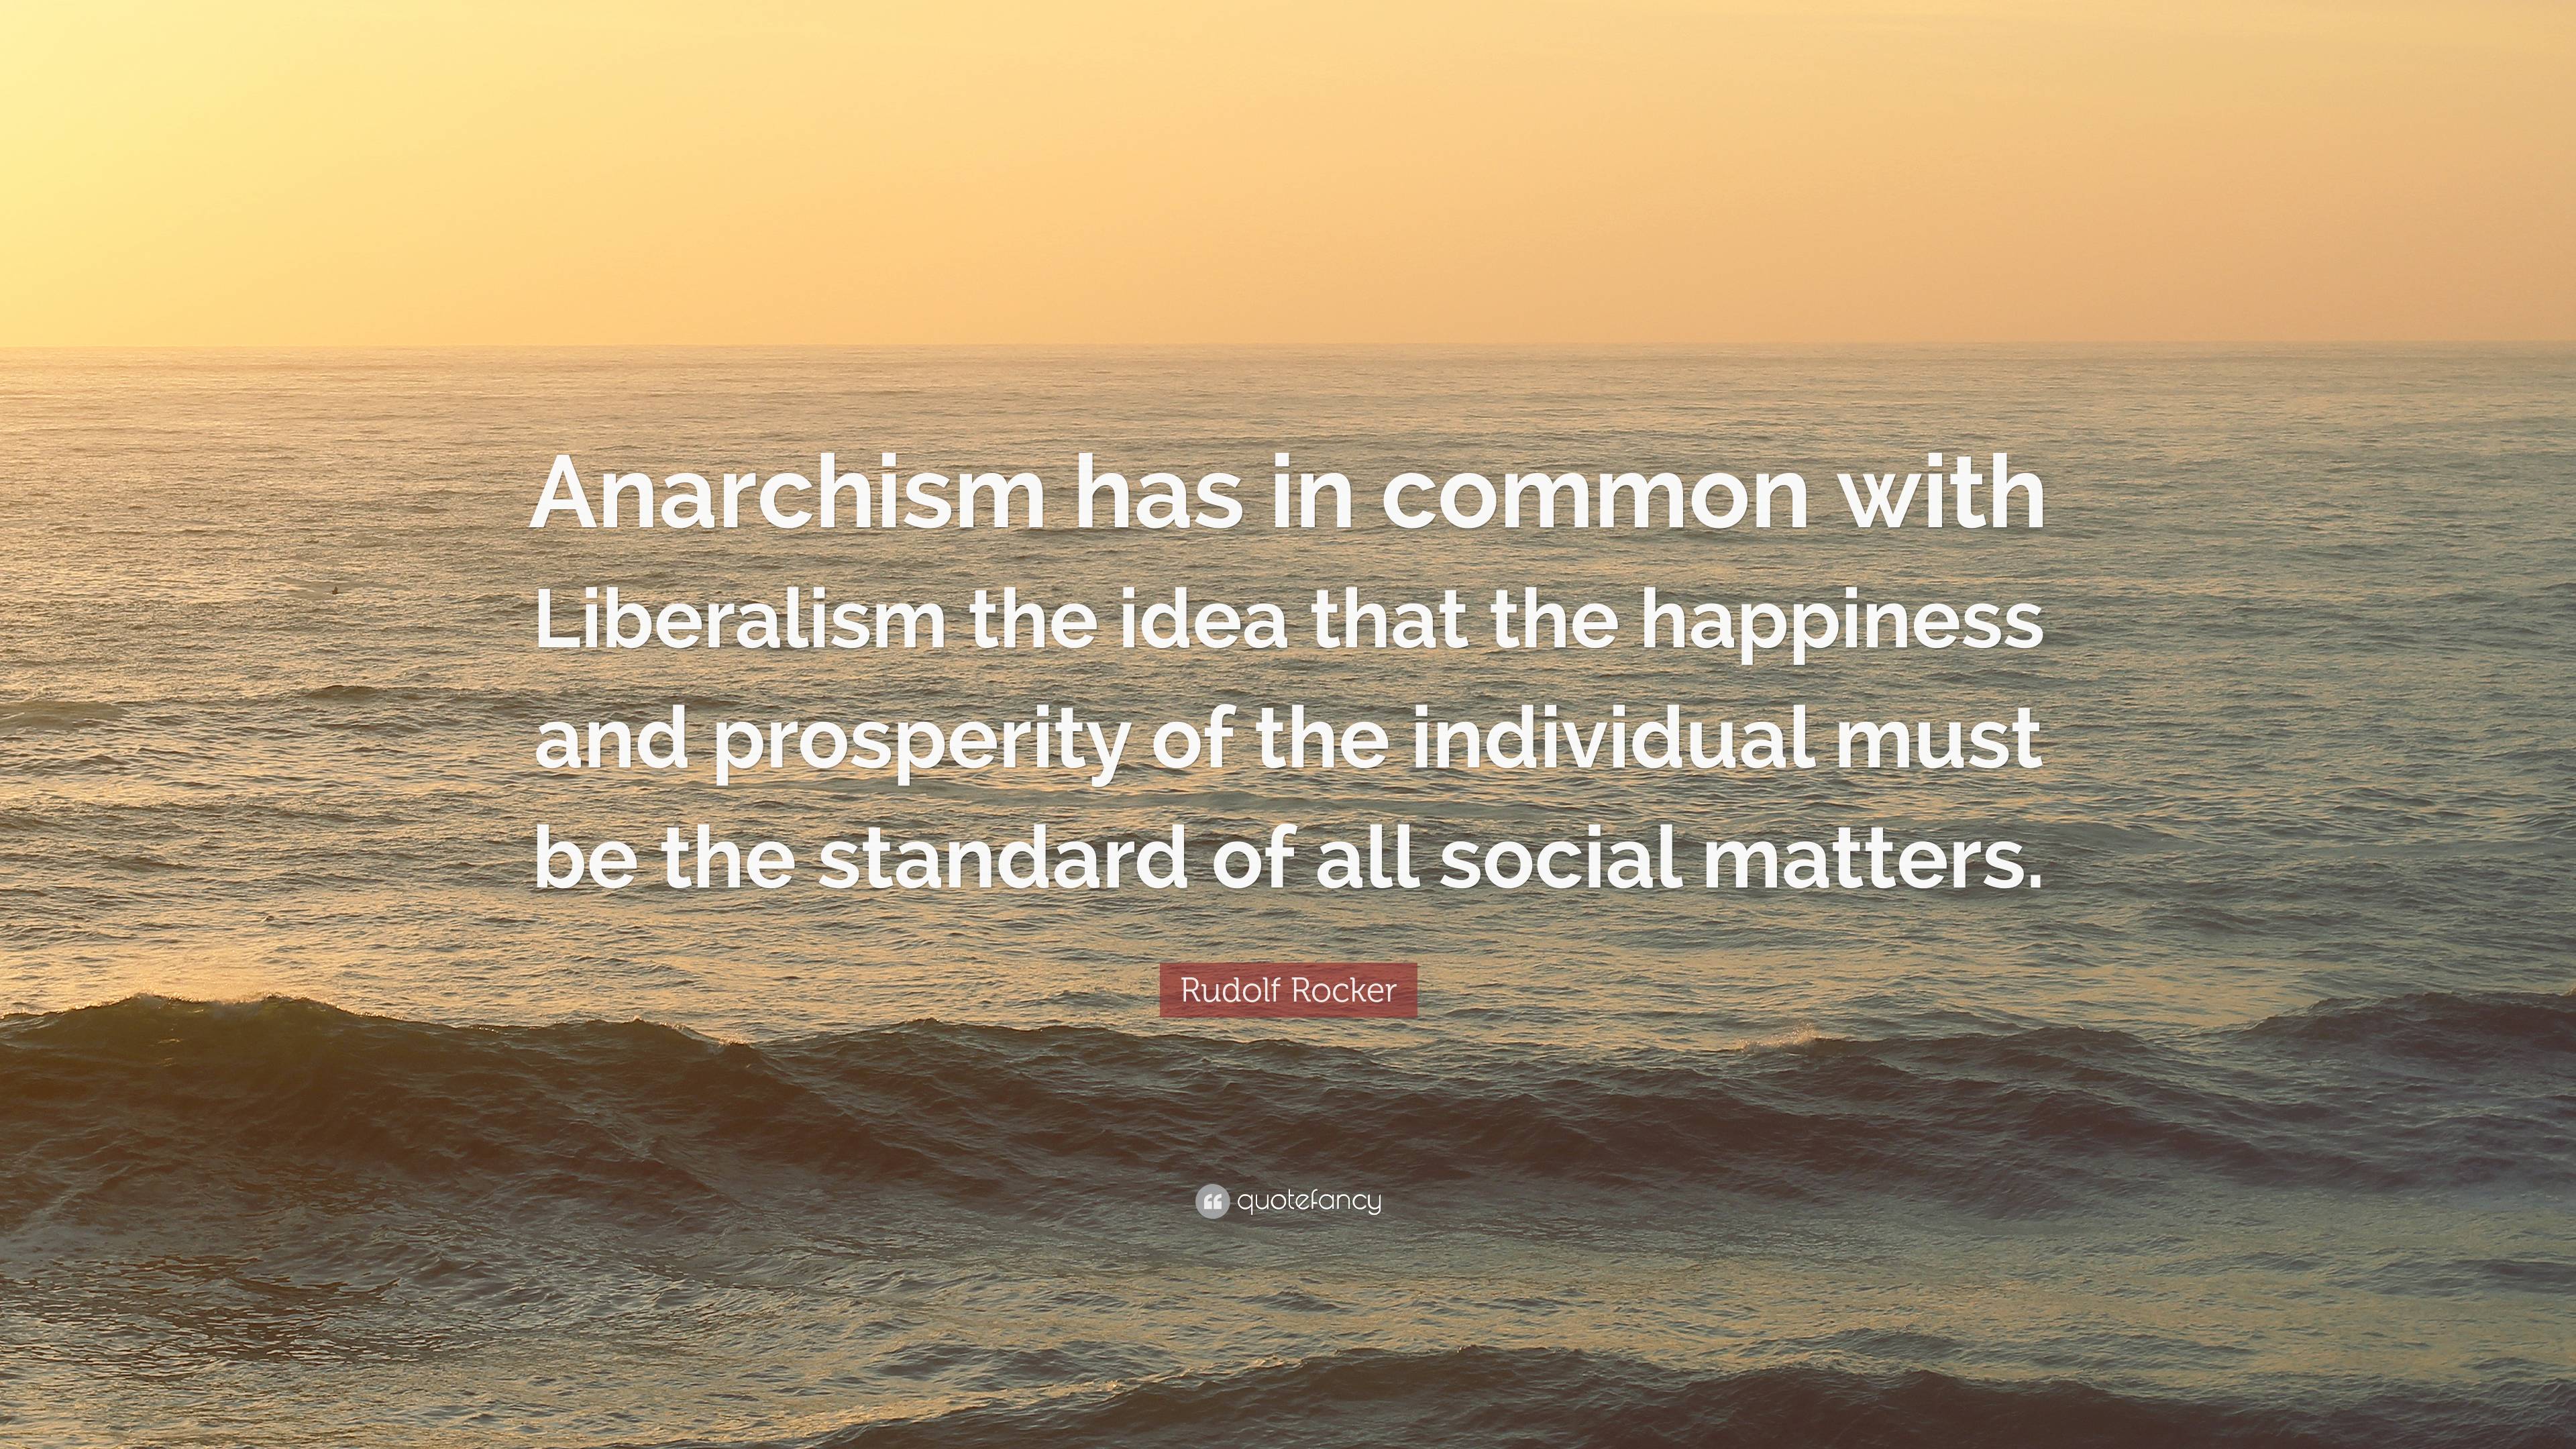 Rudolf Rocker Quote Anarchism Has In Common With Liberalism The Idea That The Happiness And